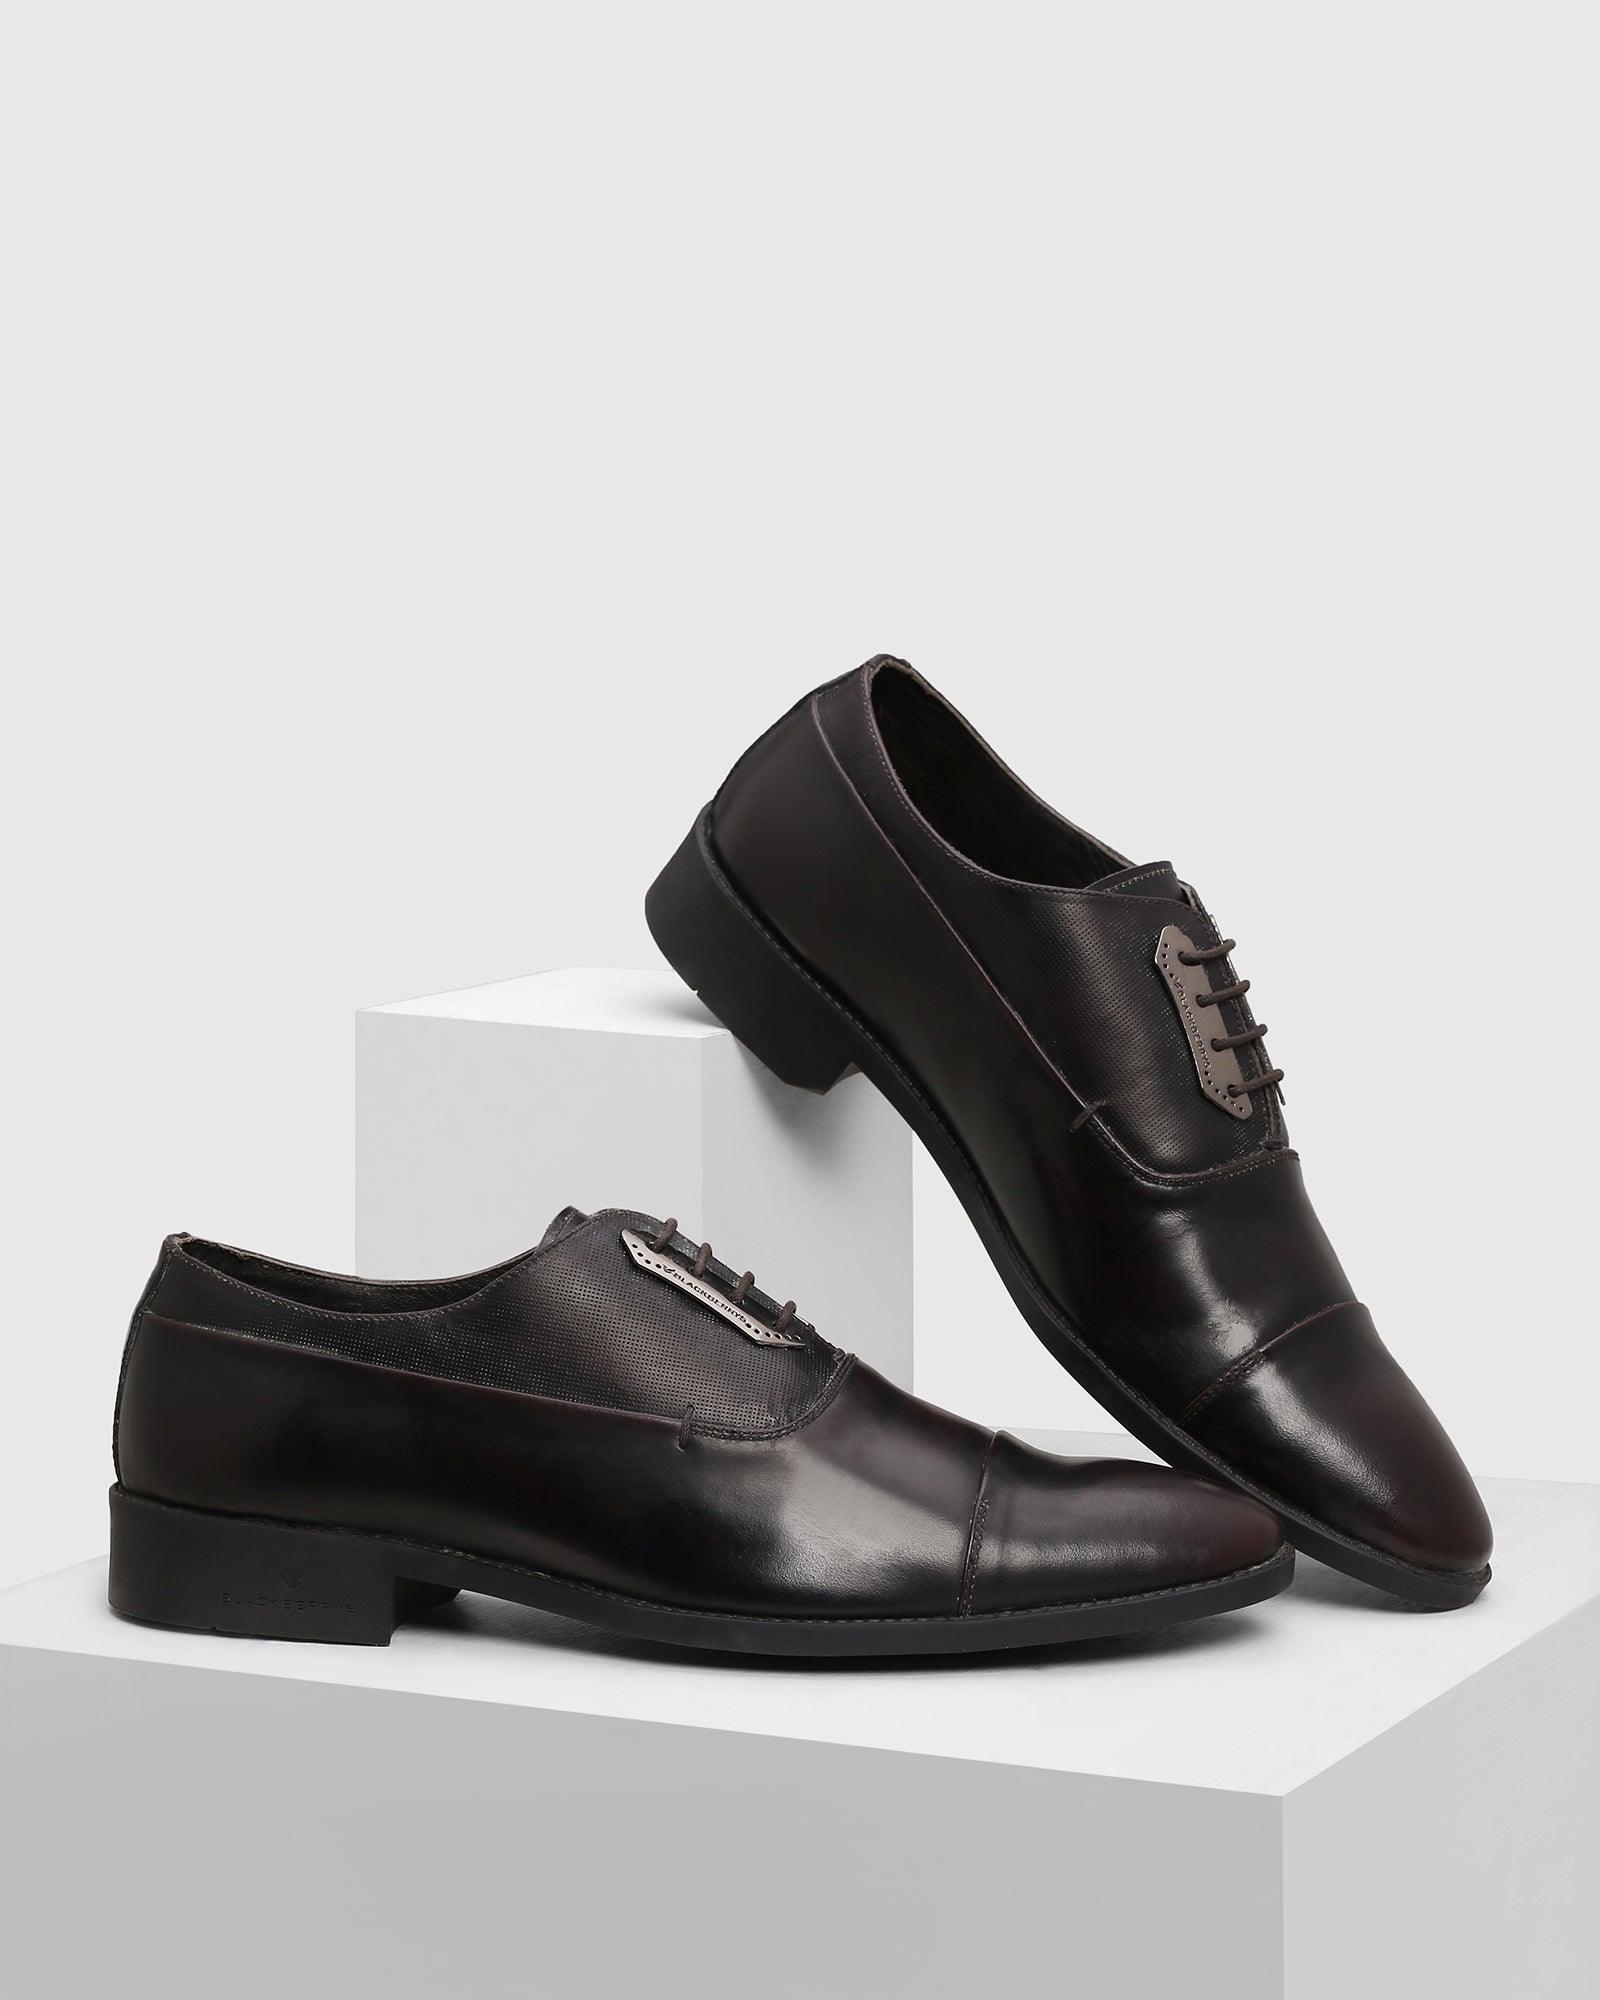 leather-formal-burgandy-solid-oxford-shoes---pronel